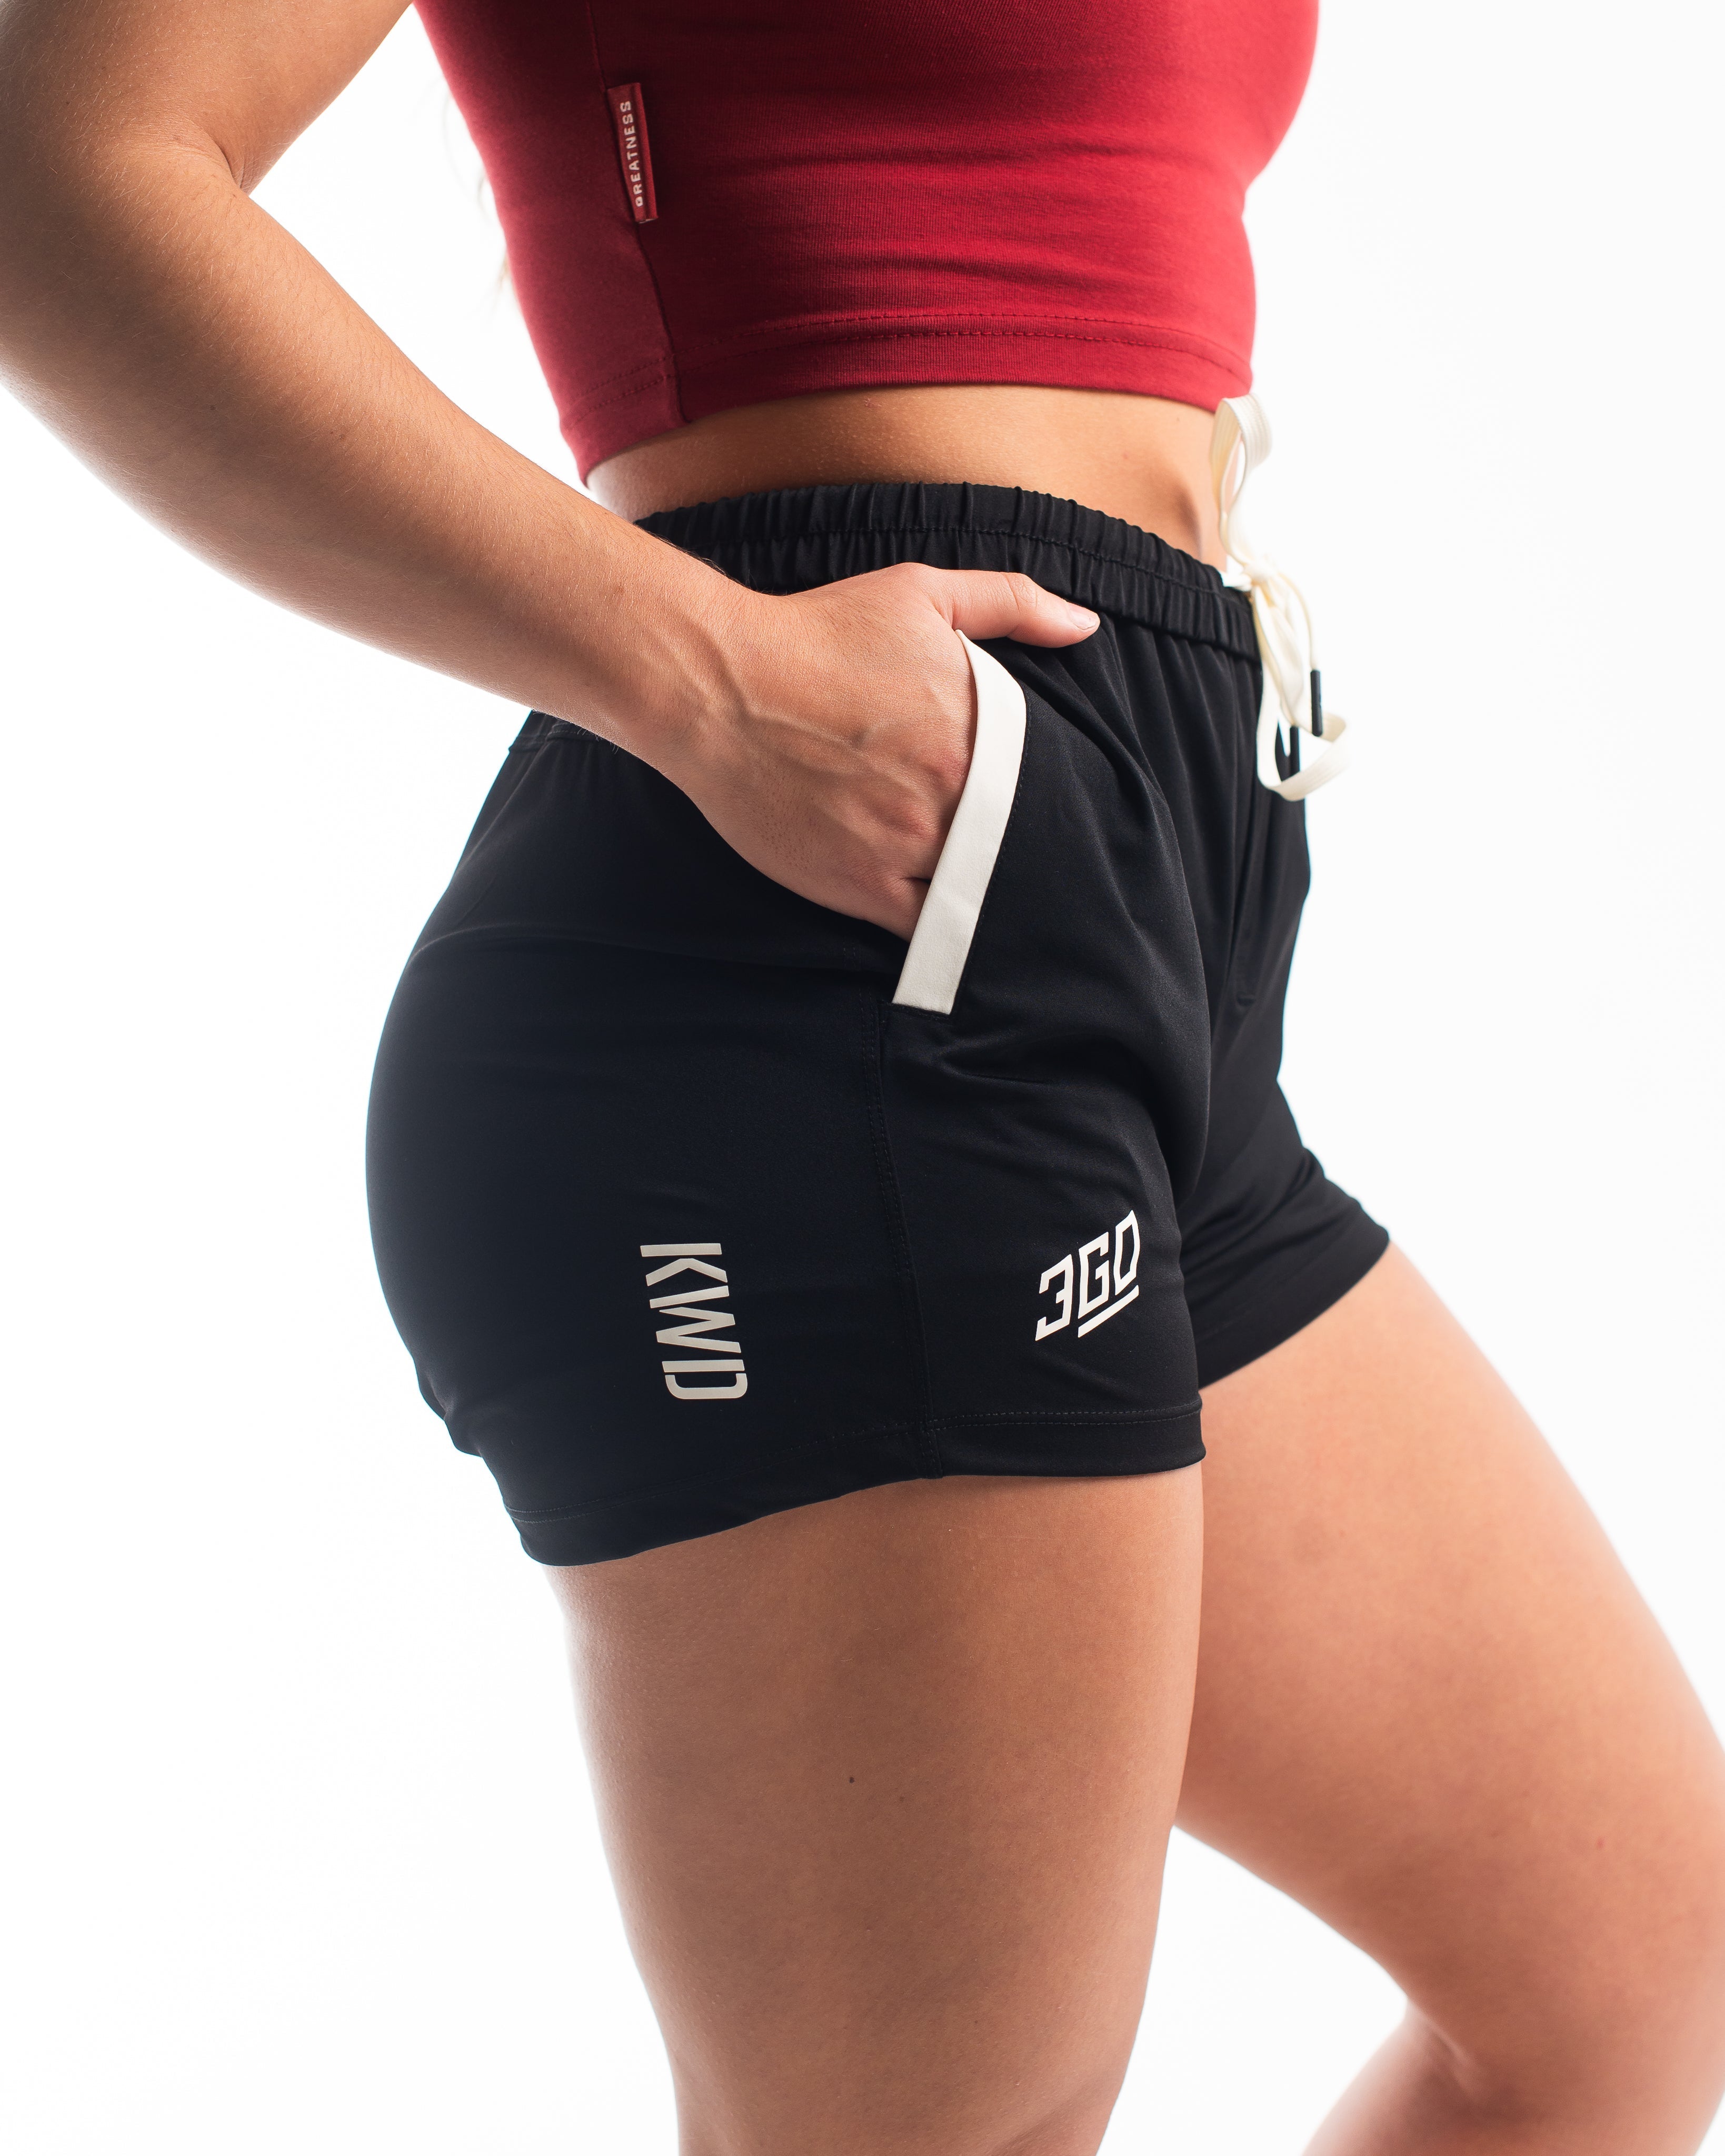 360GO was created to provide the flexibility for all movements in your training while offering comfort. These shorts offer 360 degrees of stretch in all angles and allow you to remain comfortable without limiting any movement in both training and life environments. Designed with a wide drawstring to easily adjust your waist without slipping. Purchase 360GO KWD Squat Shorts from A7 UK. Genouill�res powerlifting shipping to France, Spain, Ireland, Germany, Italy, Sweden and EU.